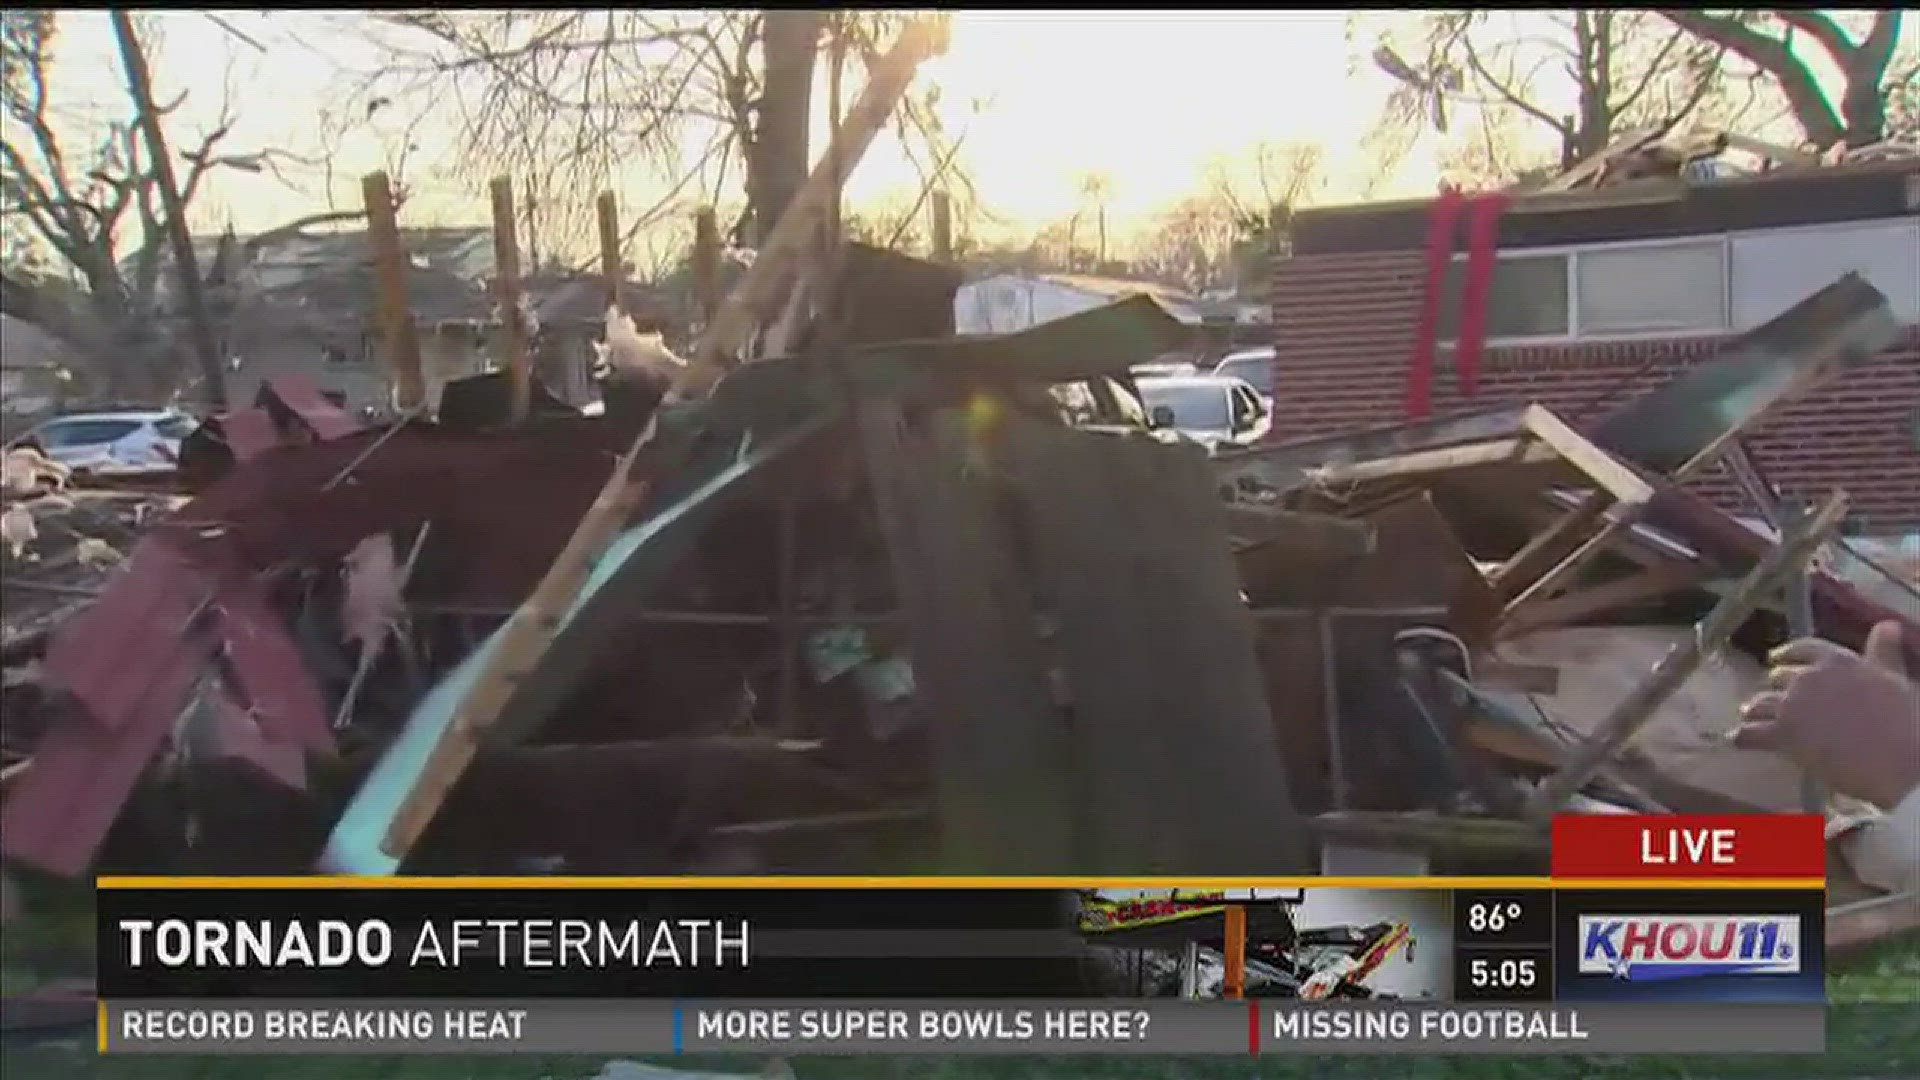 On Wednesday KHOU 11 reporter Larry Seward spoke to a woman from Houston who is now living in New Orleans about the extensive damage done to her home from the recent tornadoes.